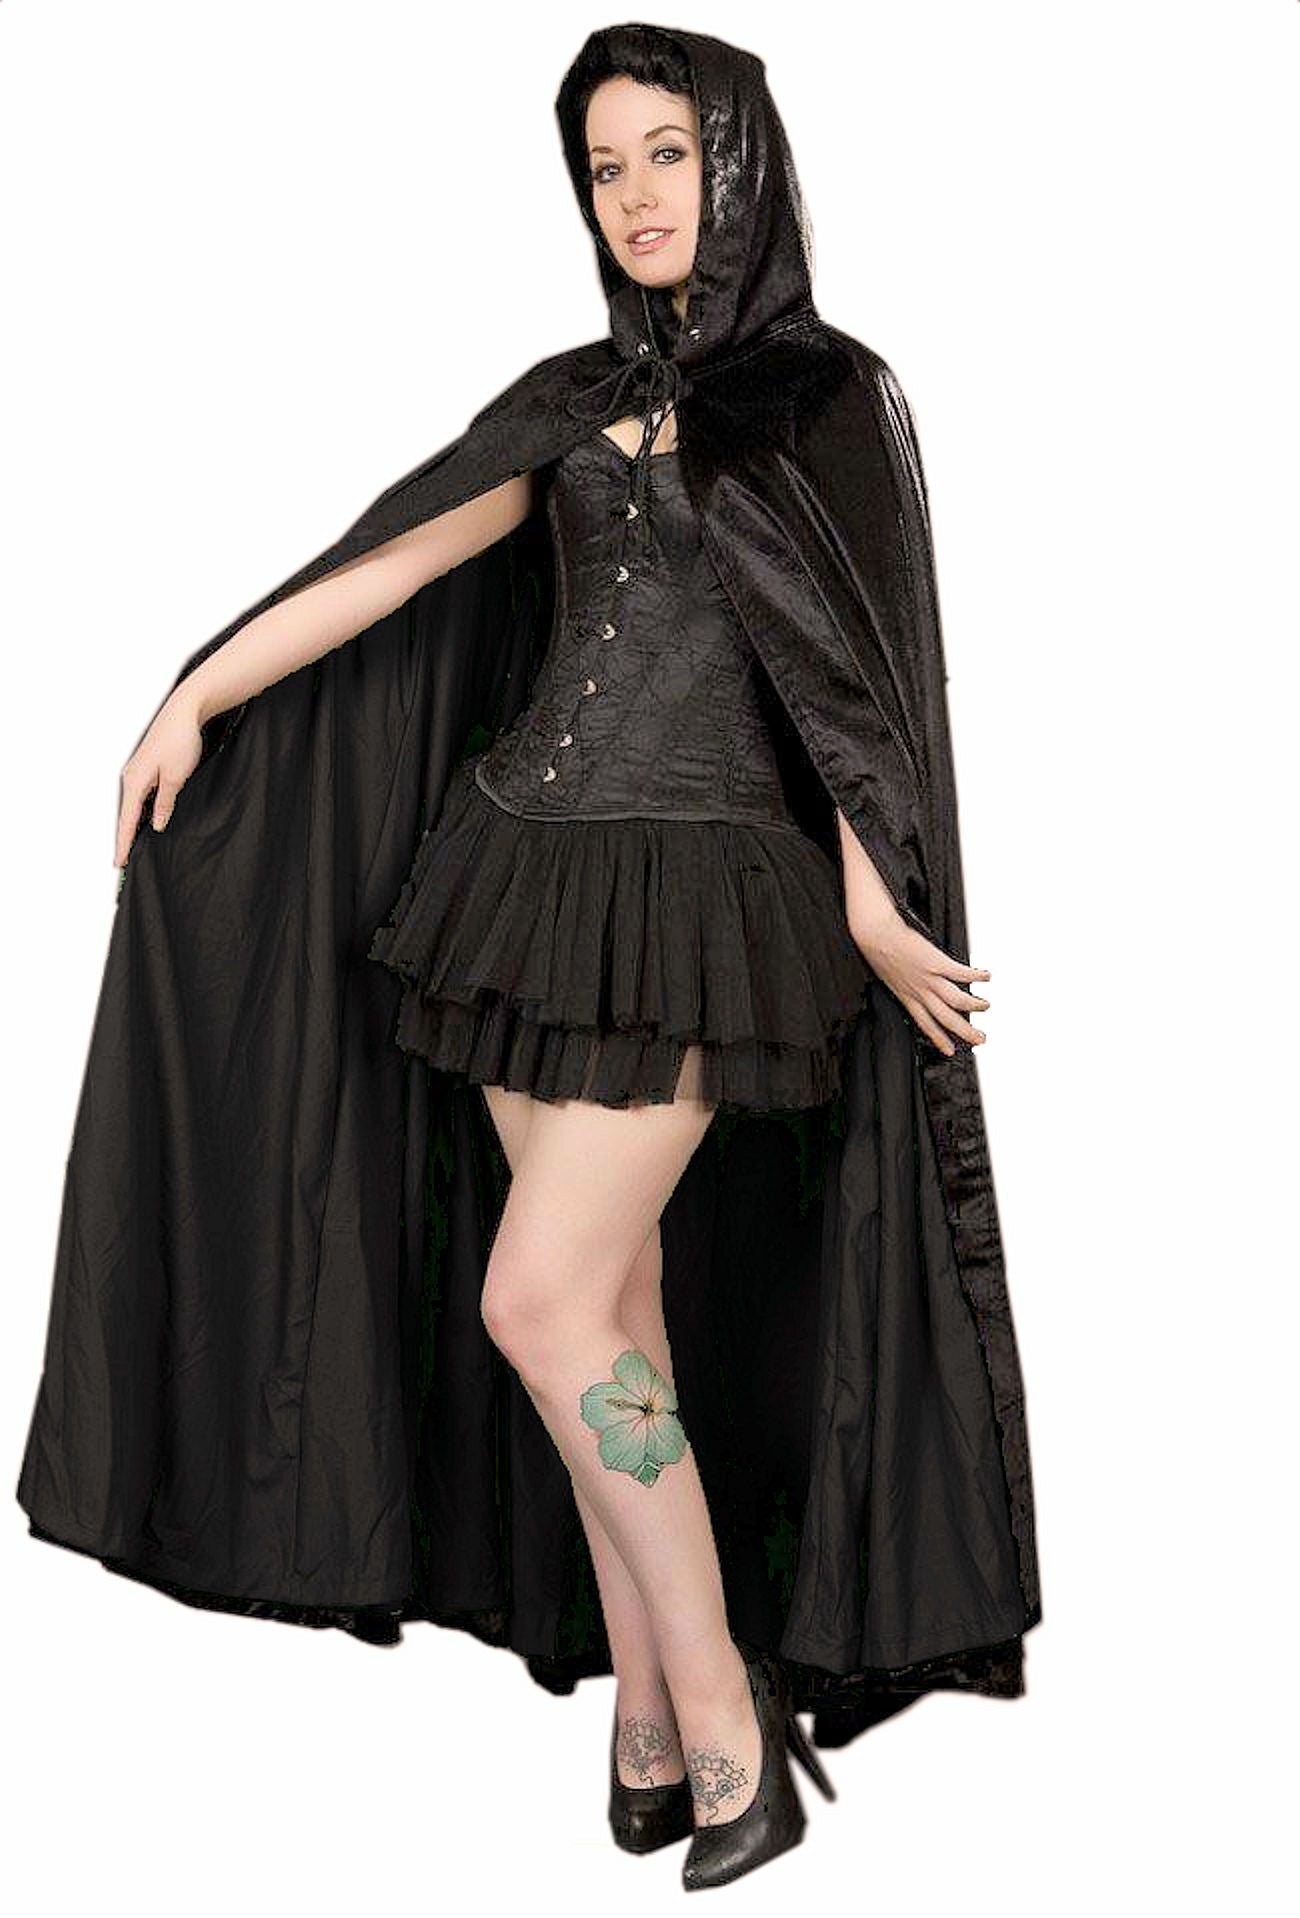 Victorian Capes and Cloaks: A Dramatic Fashion Statement